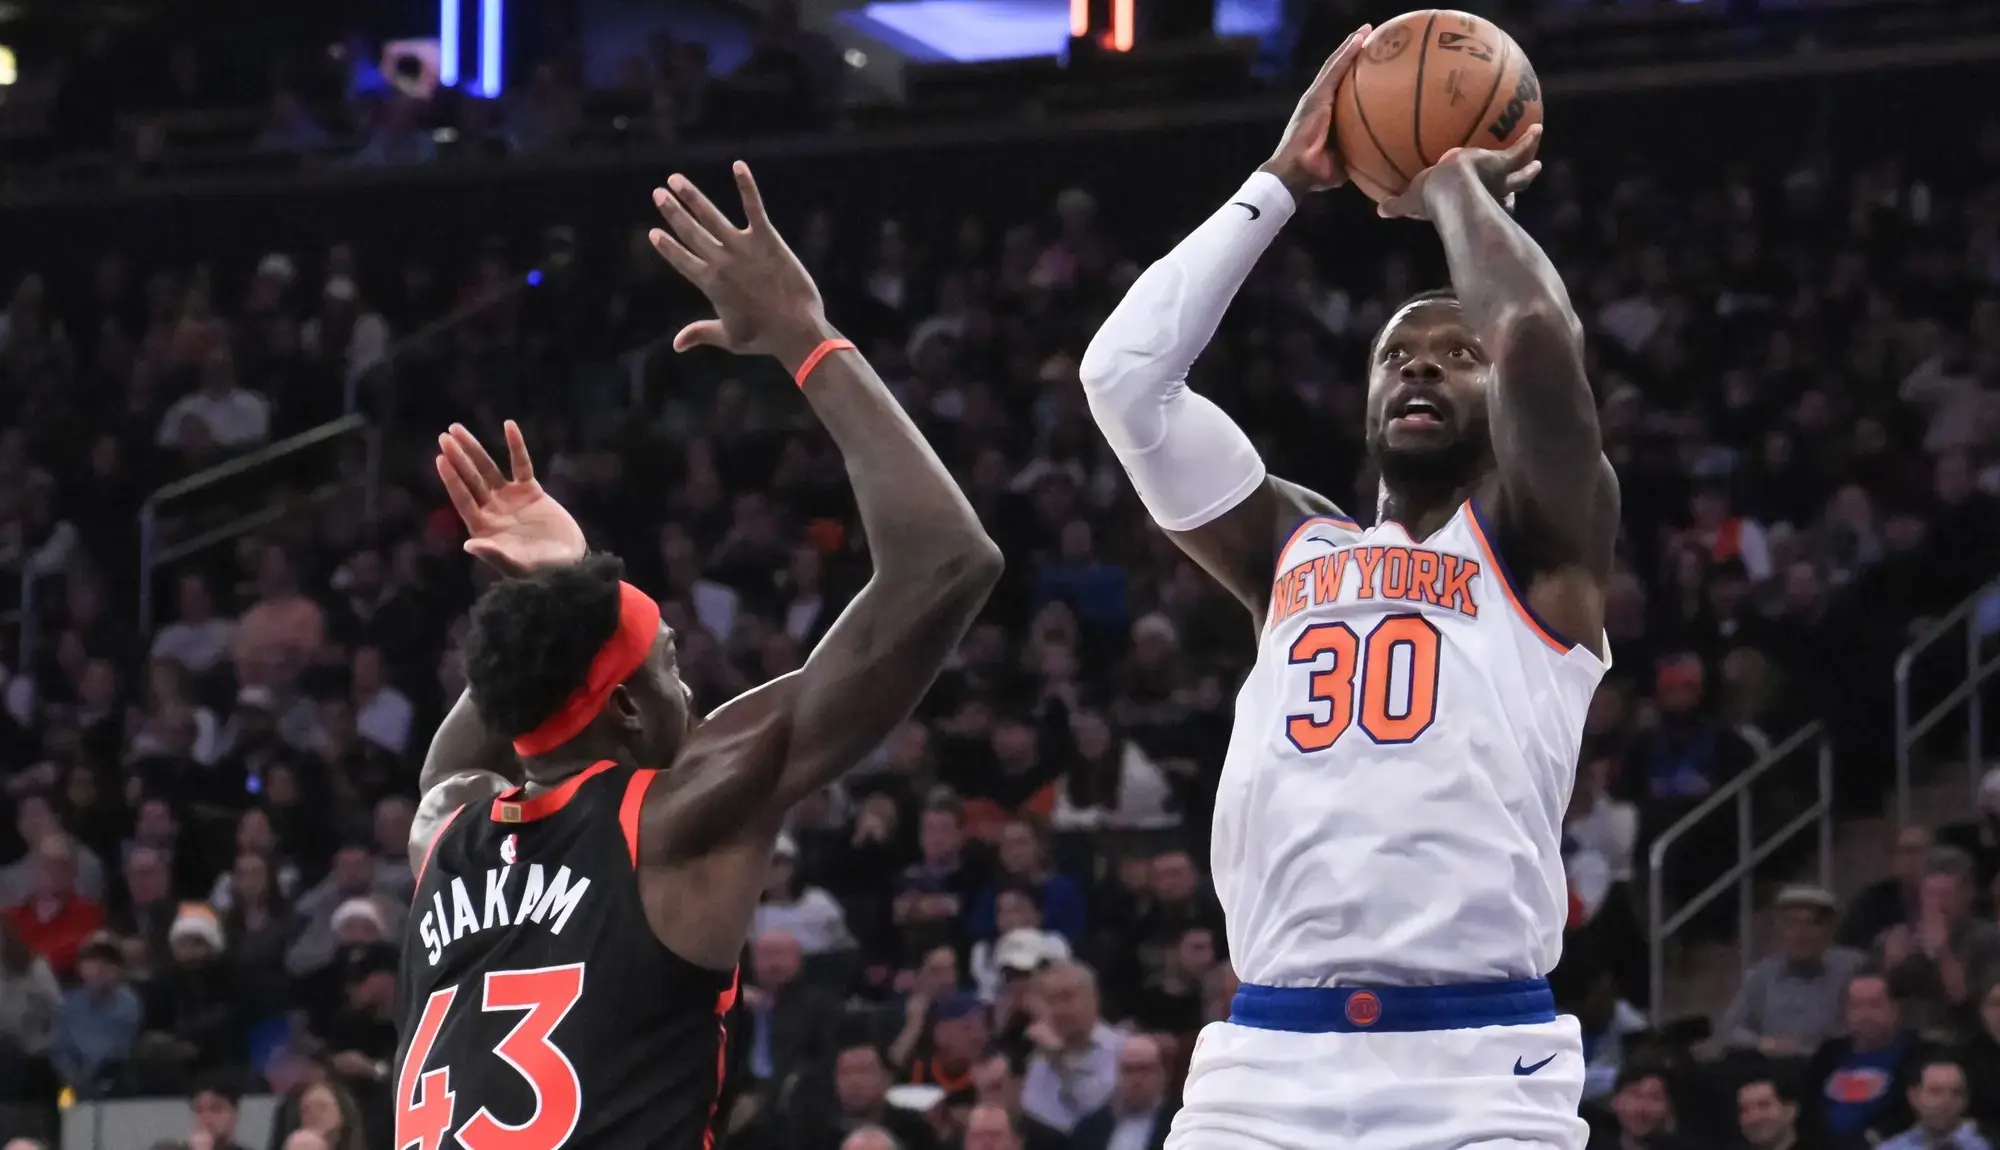 New York Knicks forward Julius Randle (30) shoots the ball while being defended by Toronto Raptors forward Pascal Siakam (43) during the first quarter at Madison Square Garden. / John Jones-USA TODAY Sports